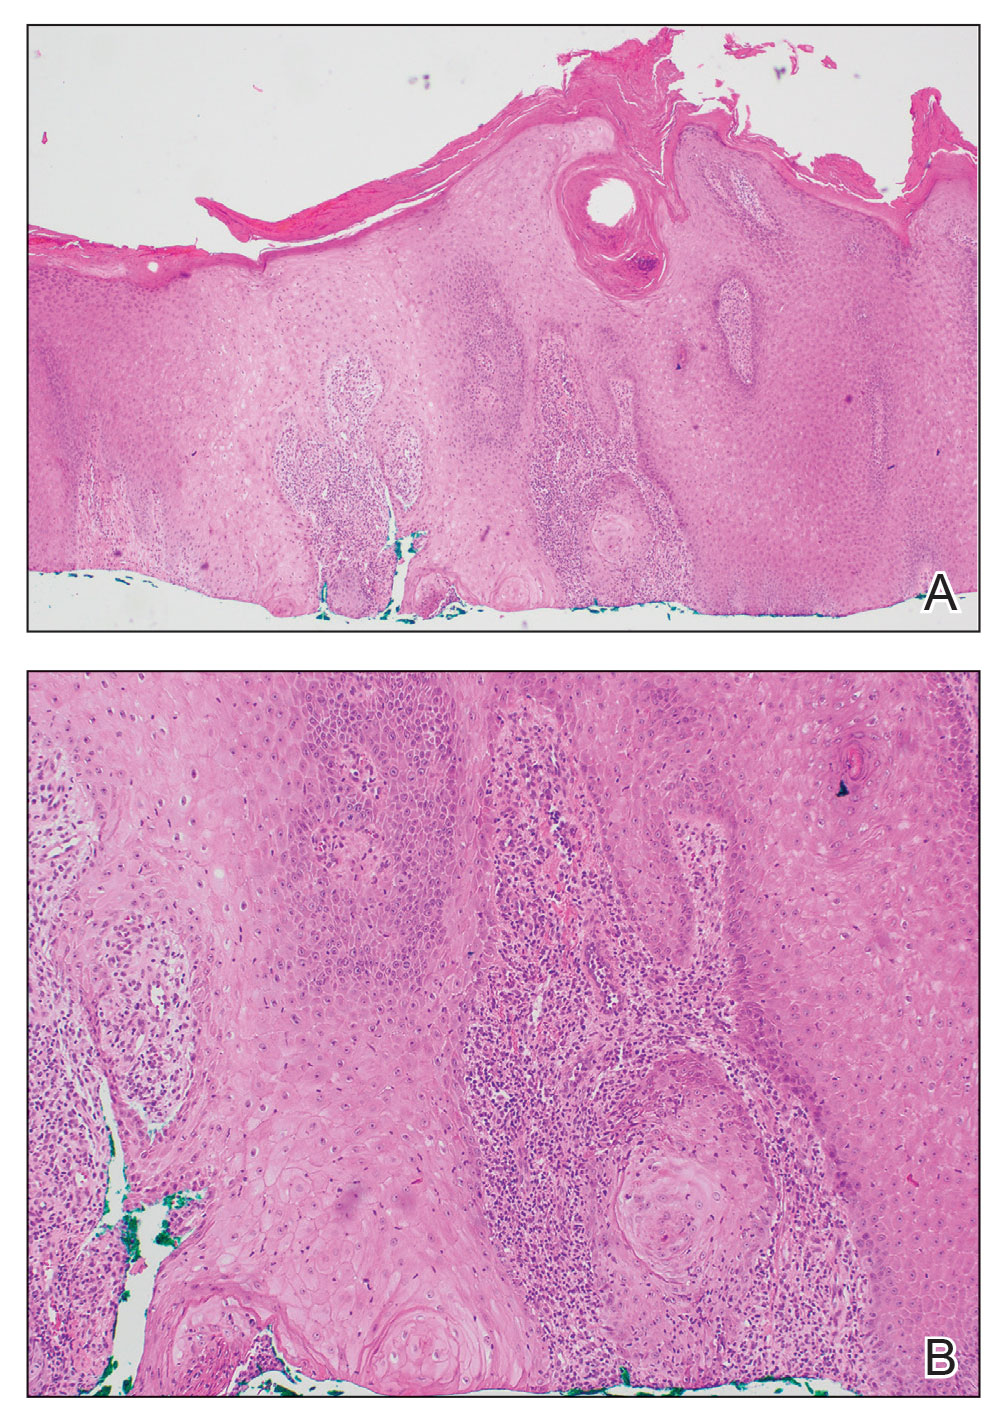 Shave biopsy sections demonstrated superficial portions of a squamous process with marked irregular acanthosis, cytologic atypia, and mixed inflammation involving the superficial dermis, suggestive of squamous cell carcinoma